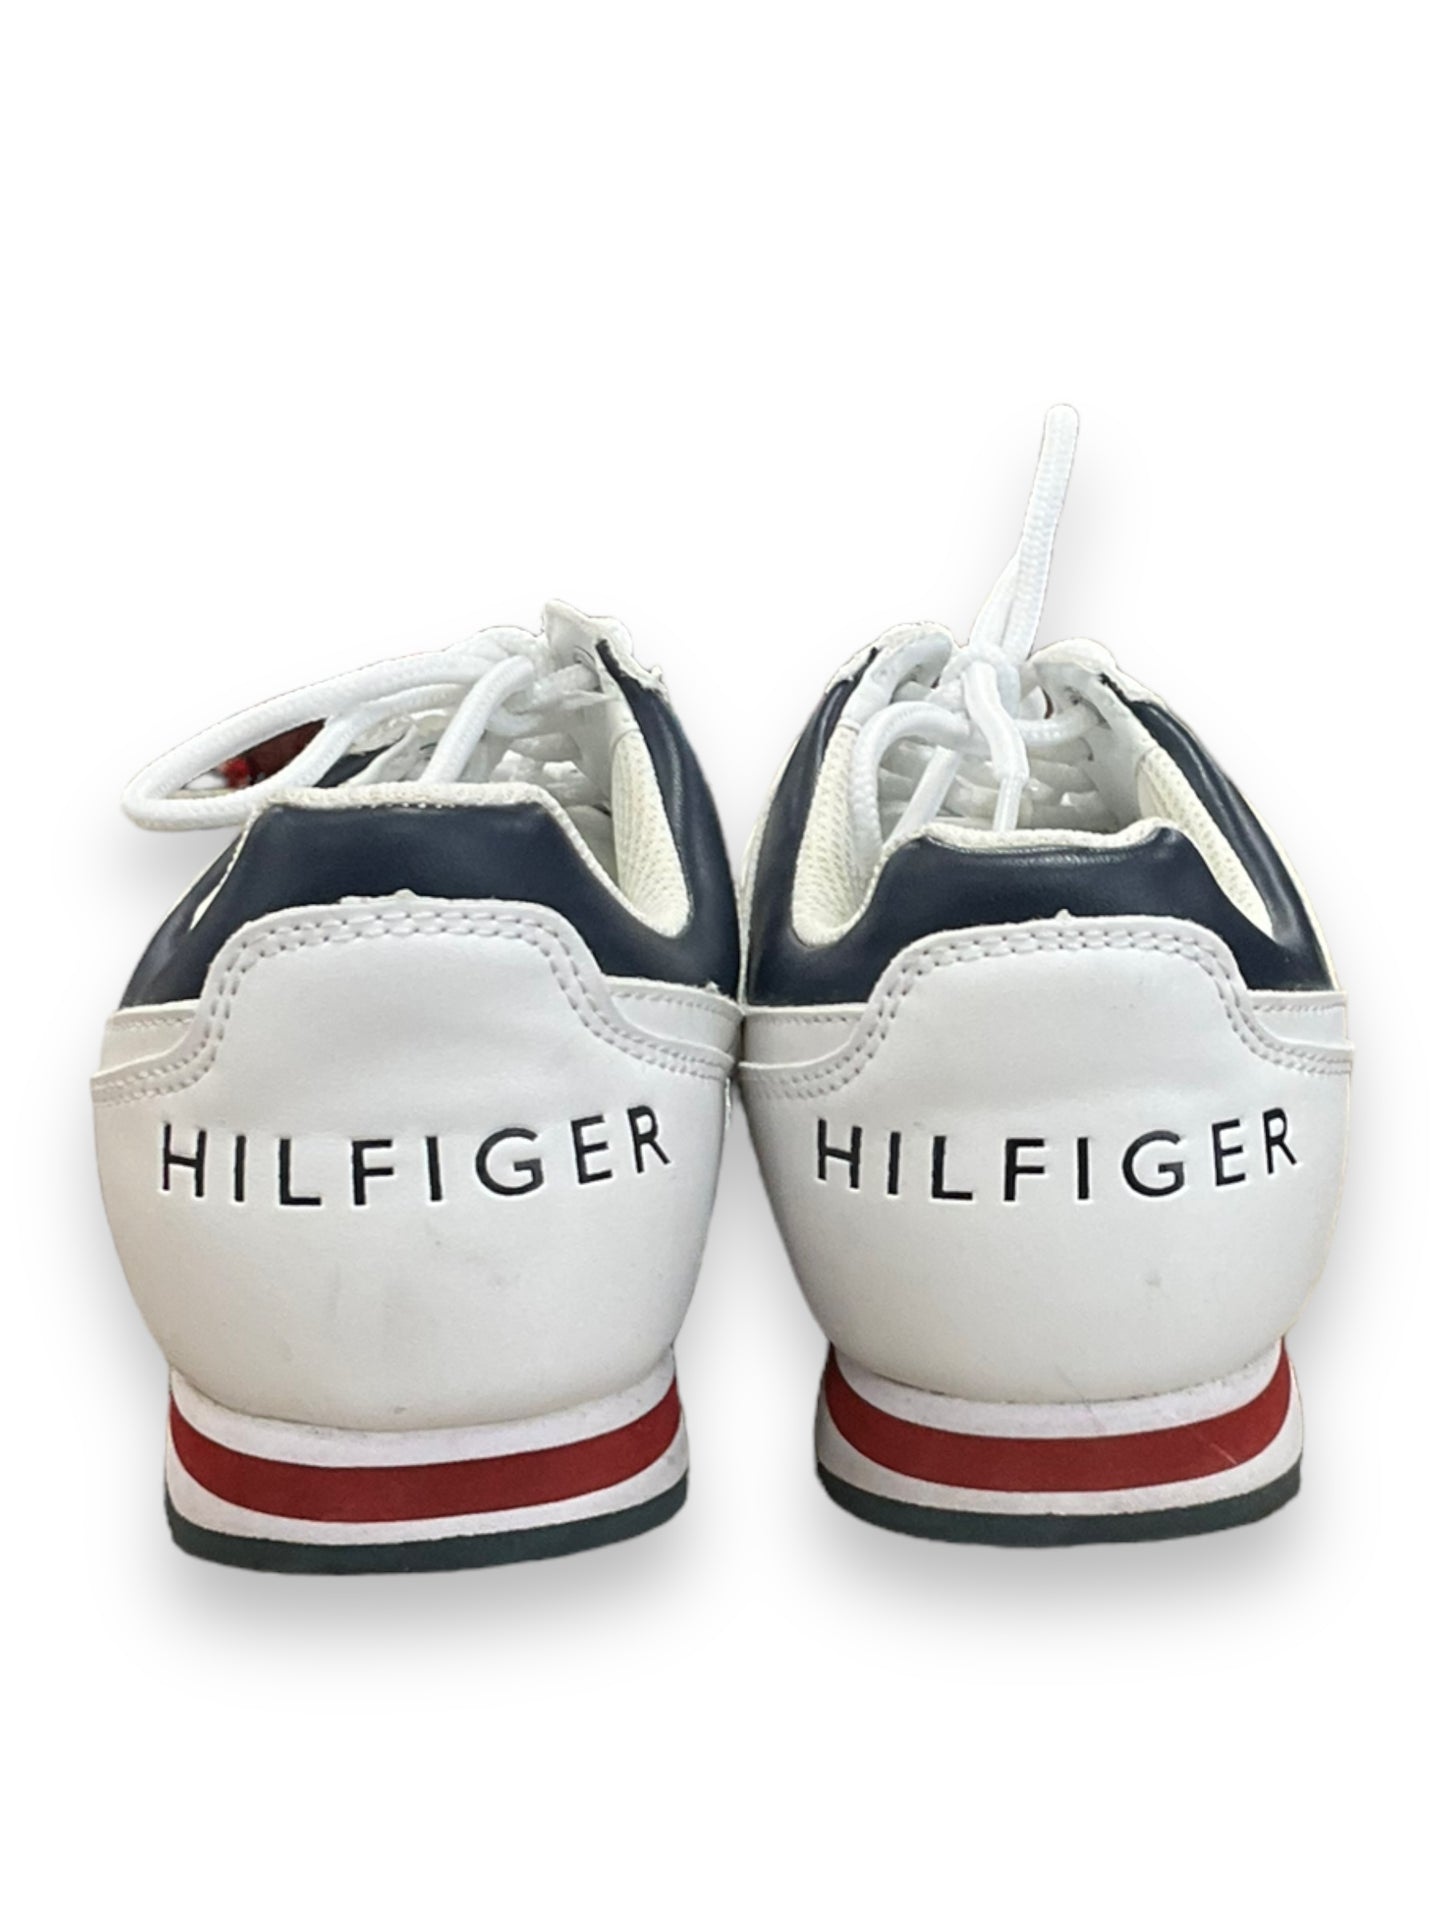 Shoes Sneakers By Tommy Hilfiger  Size: 7.5